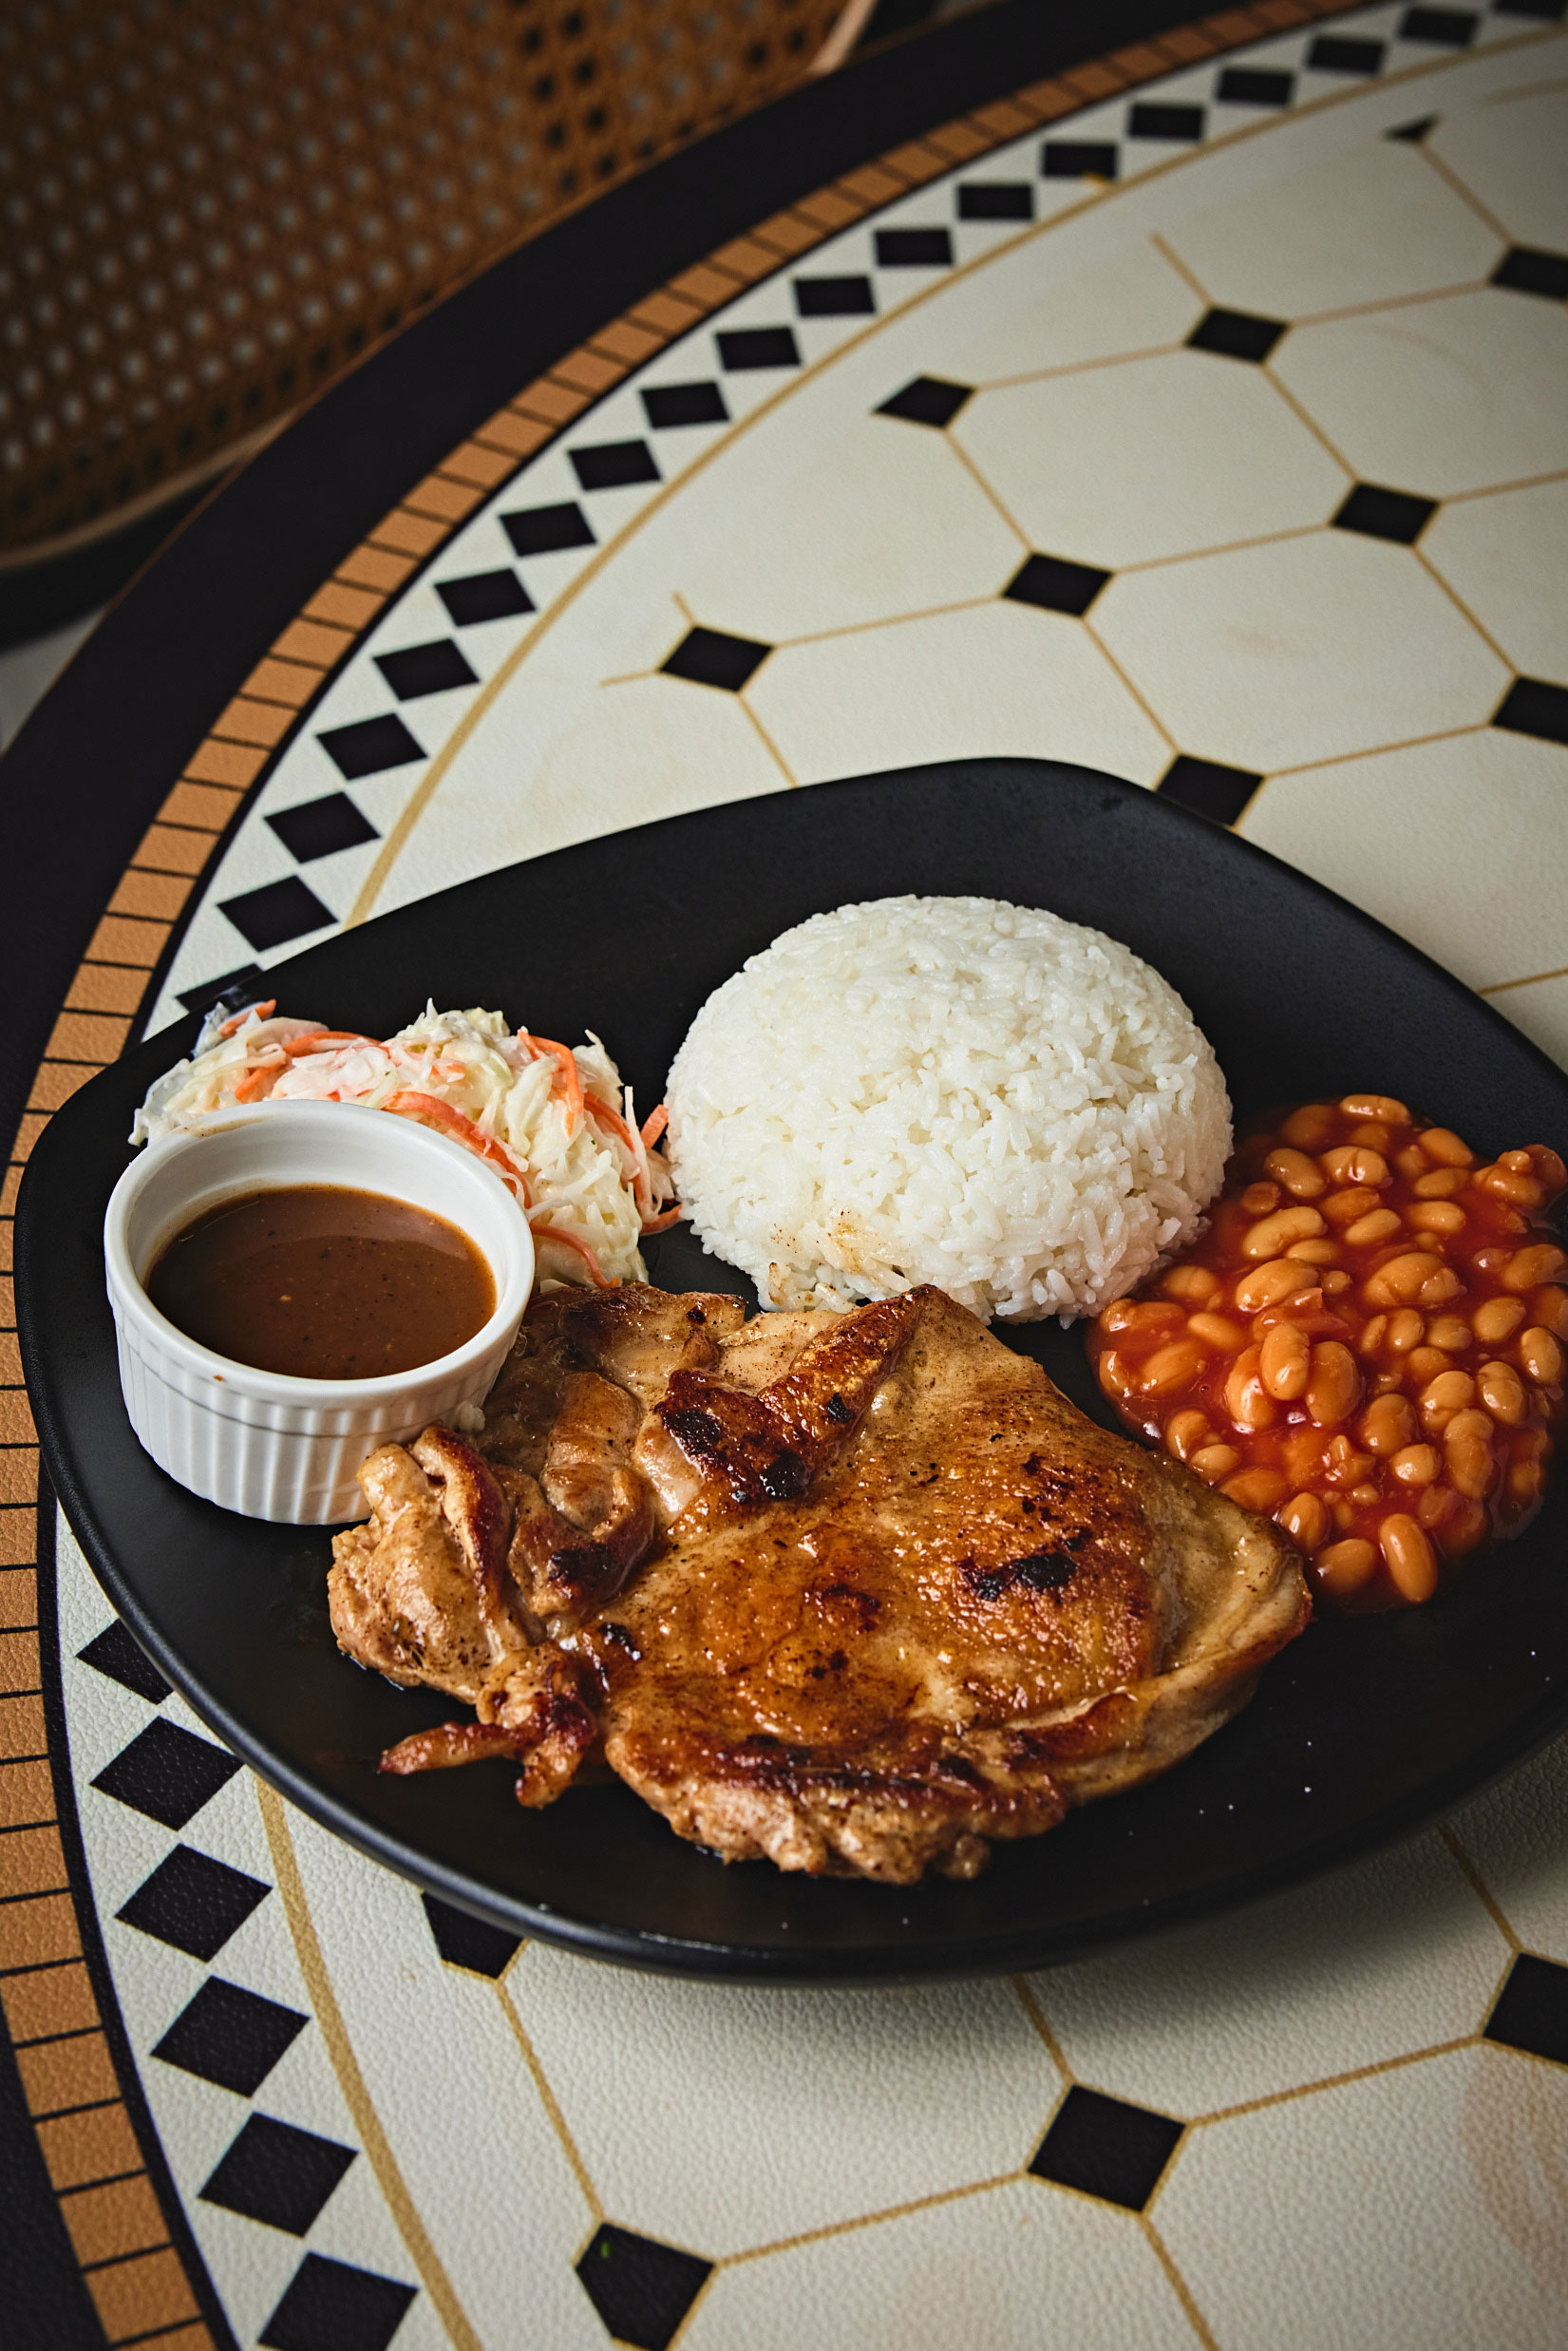 Black Pepper Chicken Chop with rice or fries, $6.80 (8 DAYS Pick!)